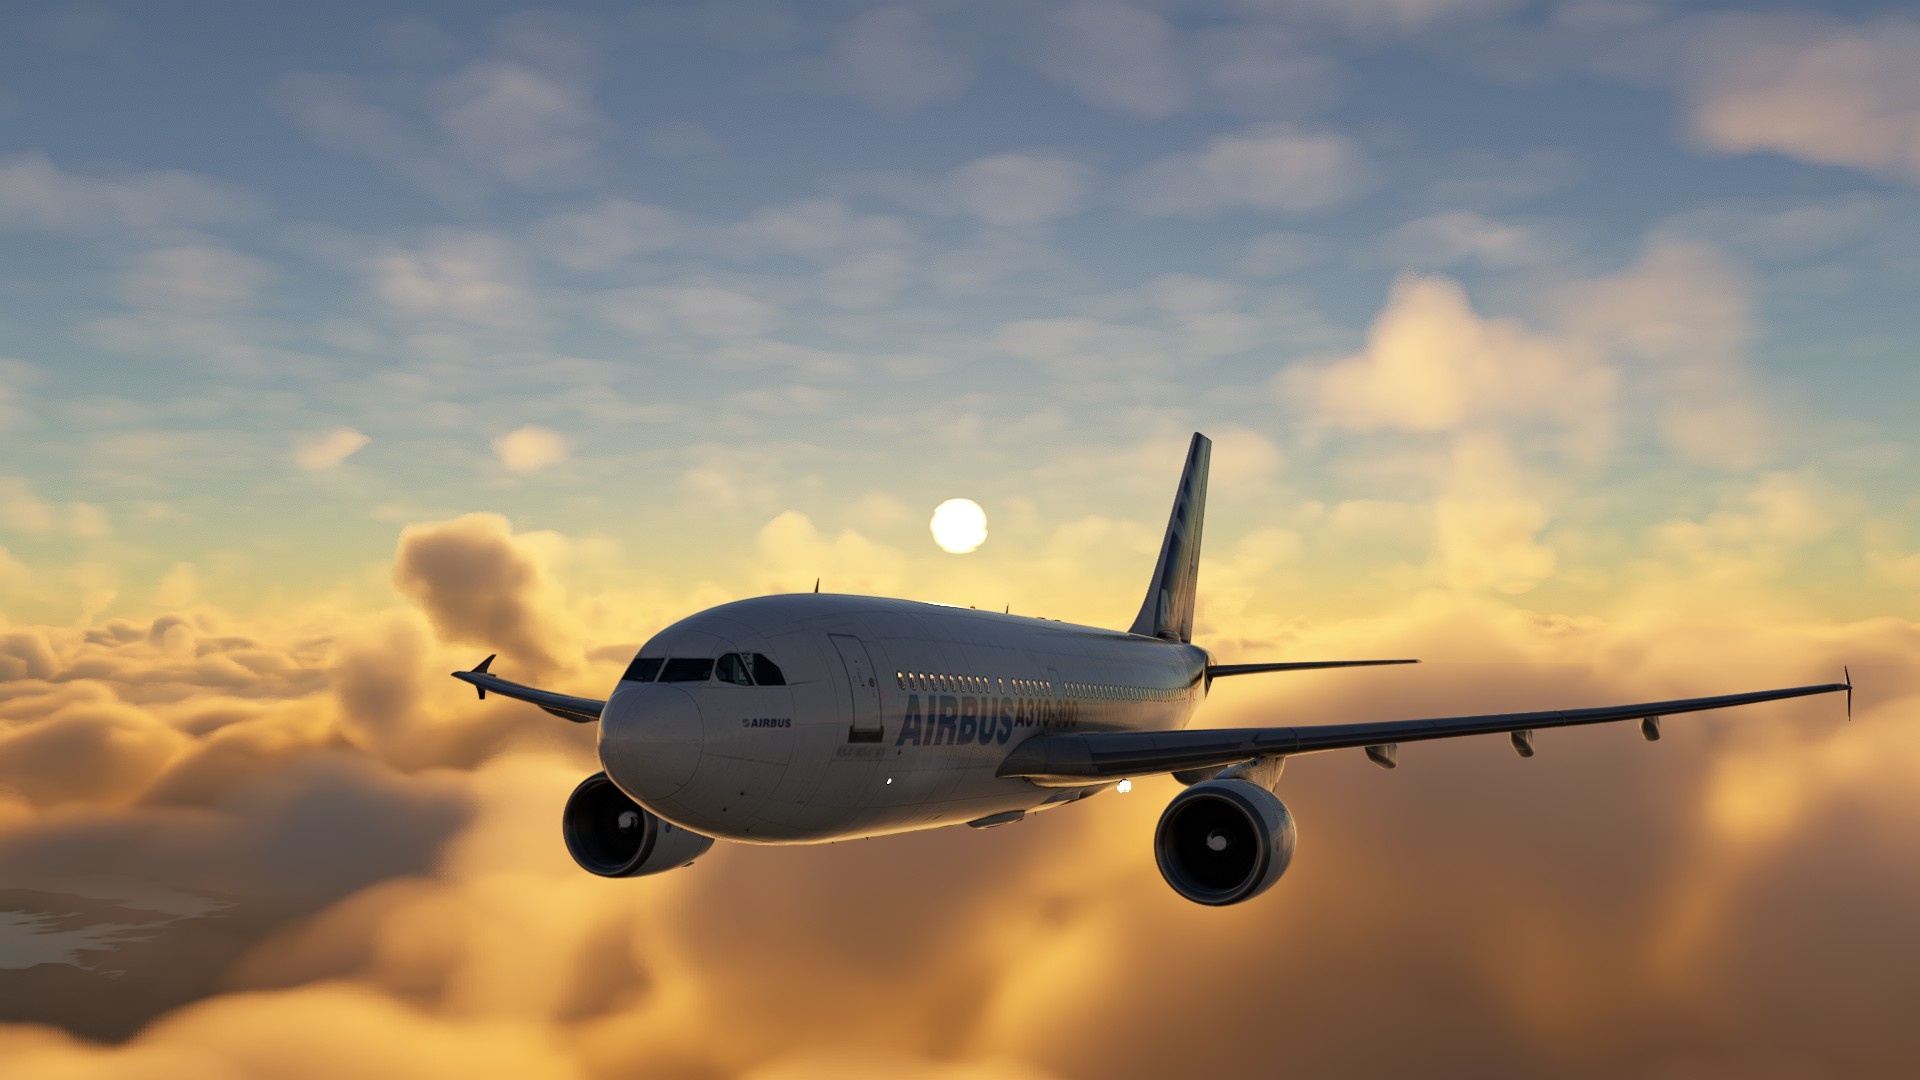 (The Airbus A310 was contributed by iniBuilds, who have also released the same aircraft for X Plane. The system depth of this model goes far beyond other default planes)